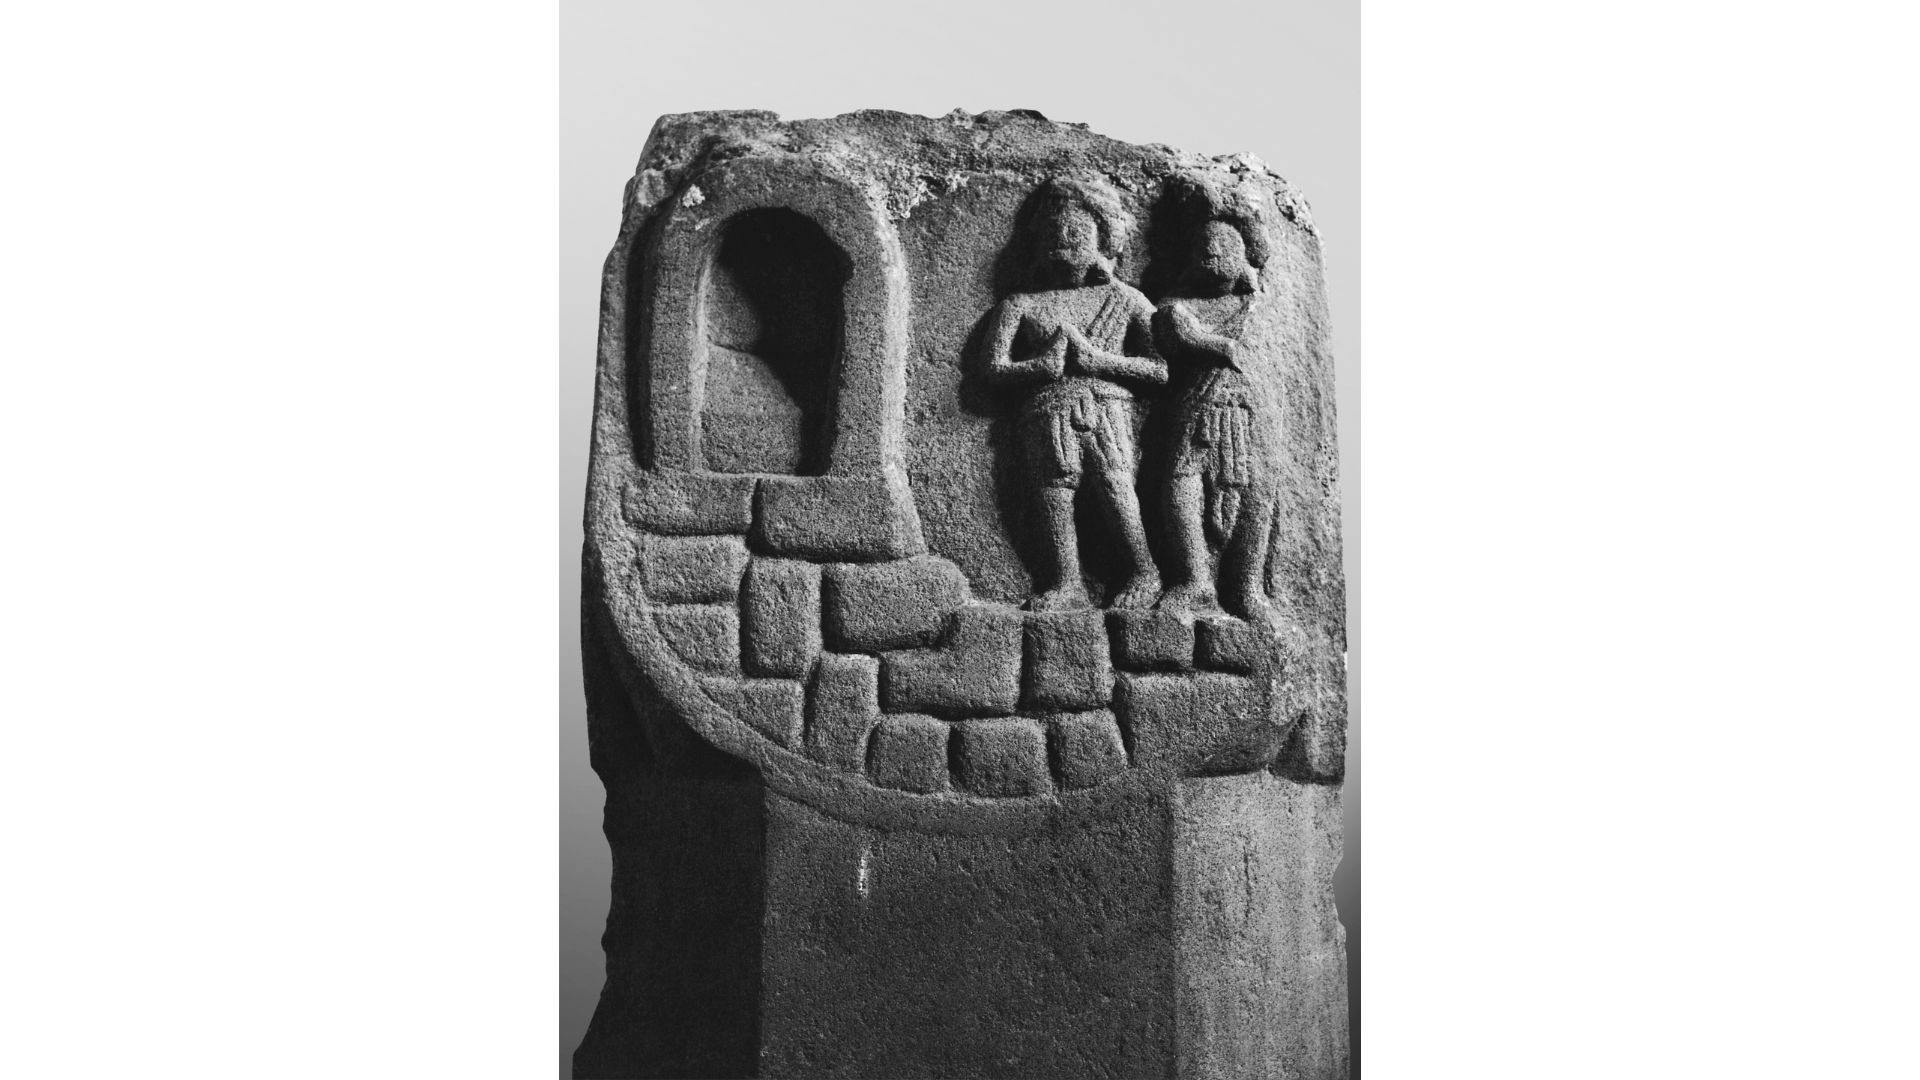 Depiction of the Indasala cave from Bodhgaya, 2nd–1st century BCE. Photograph: American Institute of Indian Studies, courtesy Pushkar Sohoni.iction of the Indasala cave from Bodhgaya, 2nd–1st century BCE. Photograph: American Institute of Indian Studies, courtesy Pushkar Sohoni.